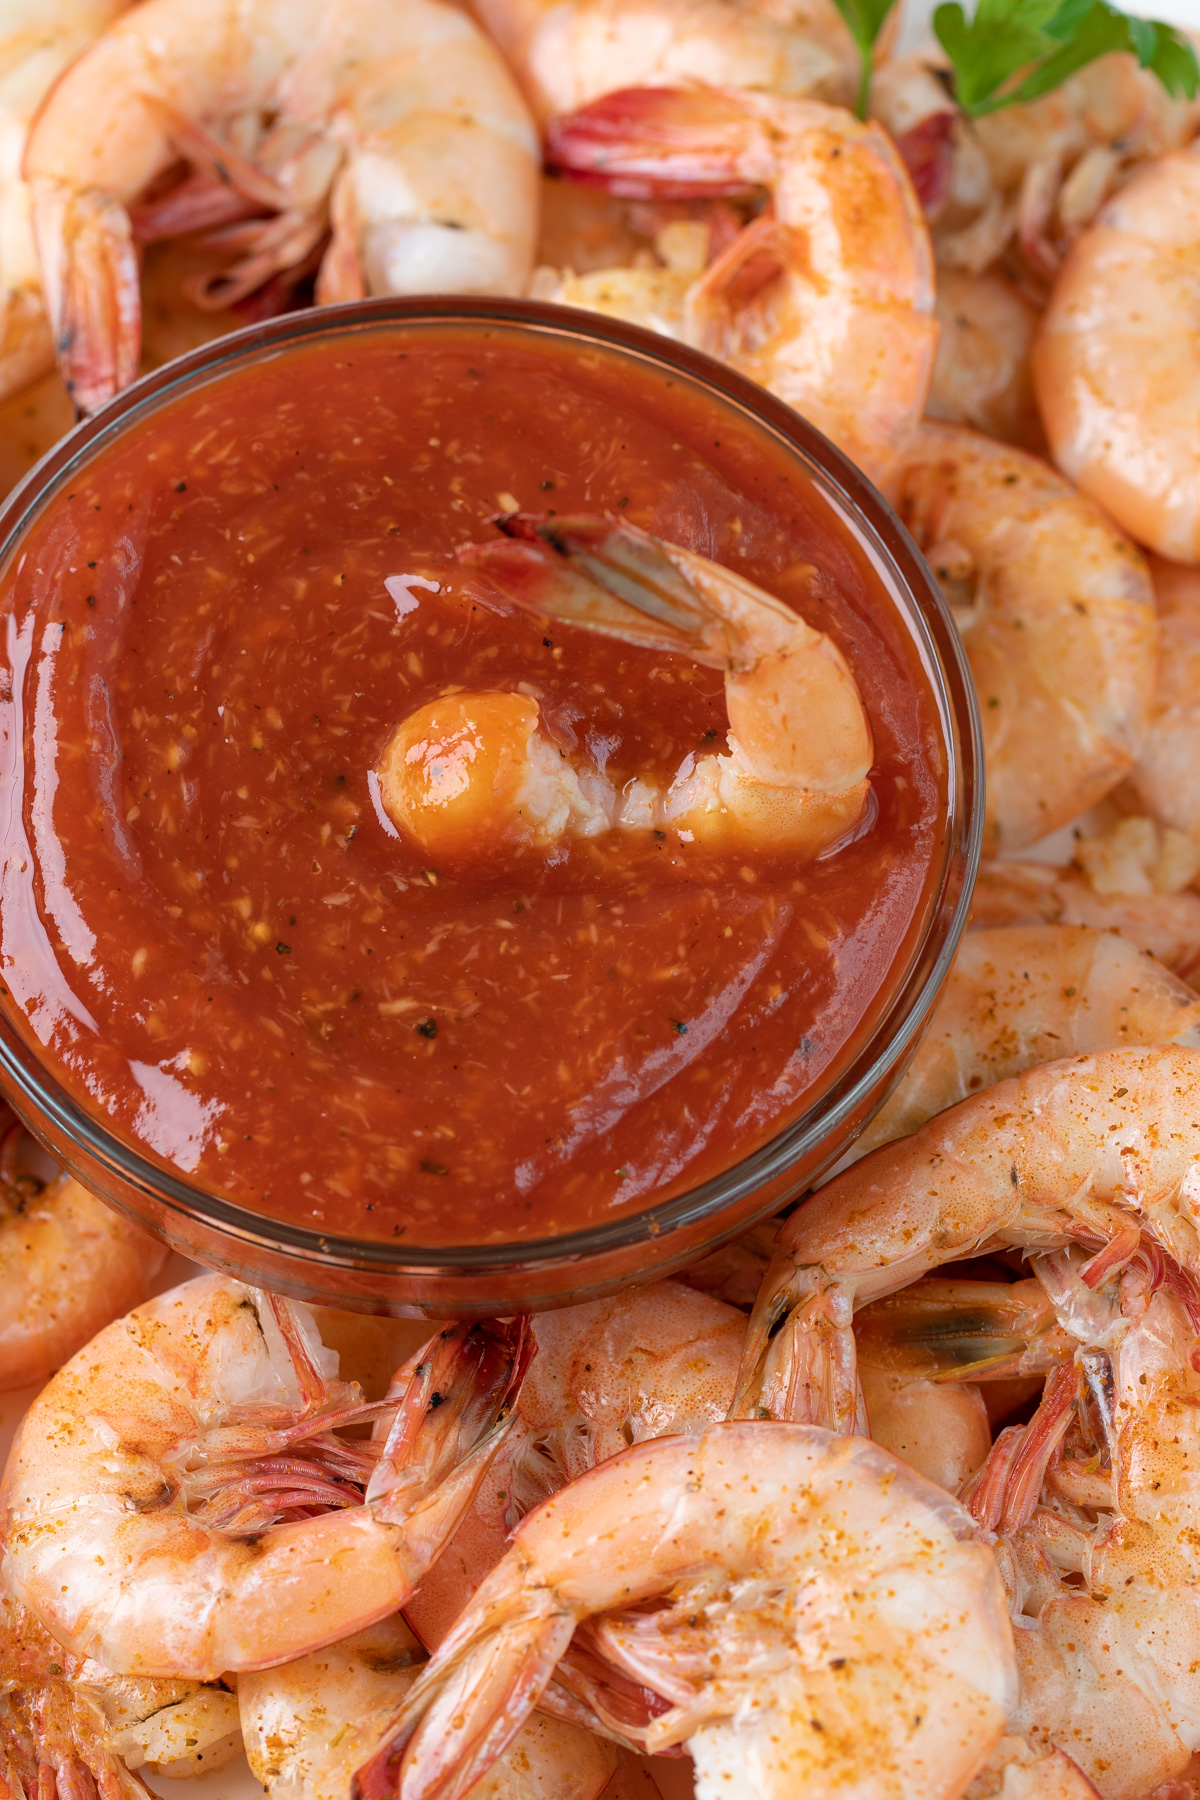 Overhead closeup view of a bowl of cocktail sauce surrounded by steamed shrimp.